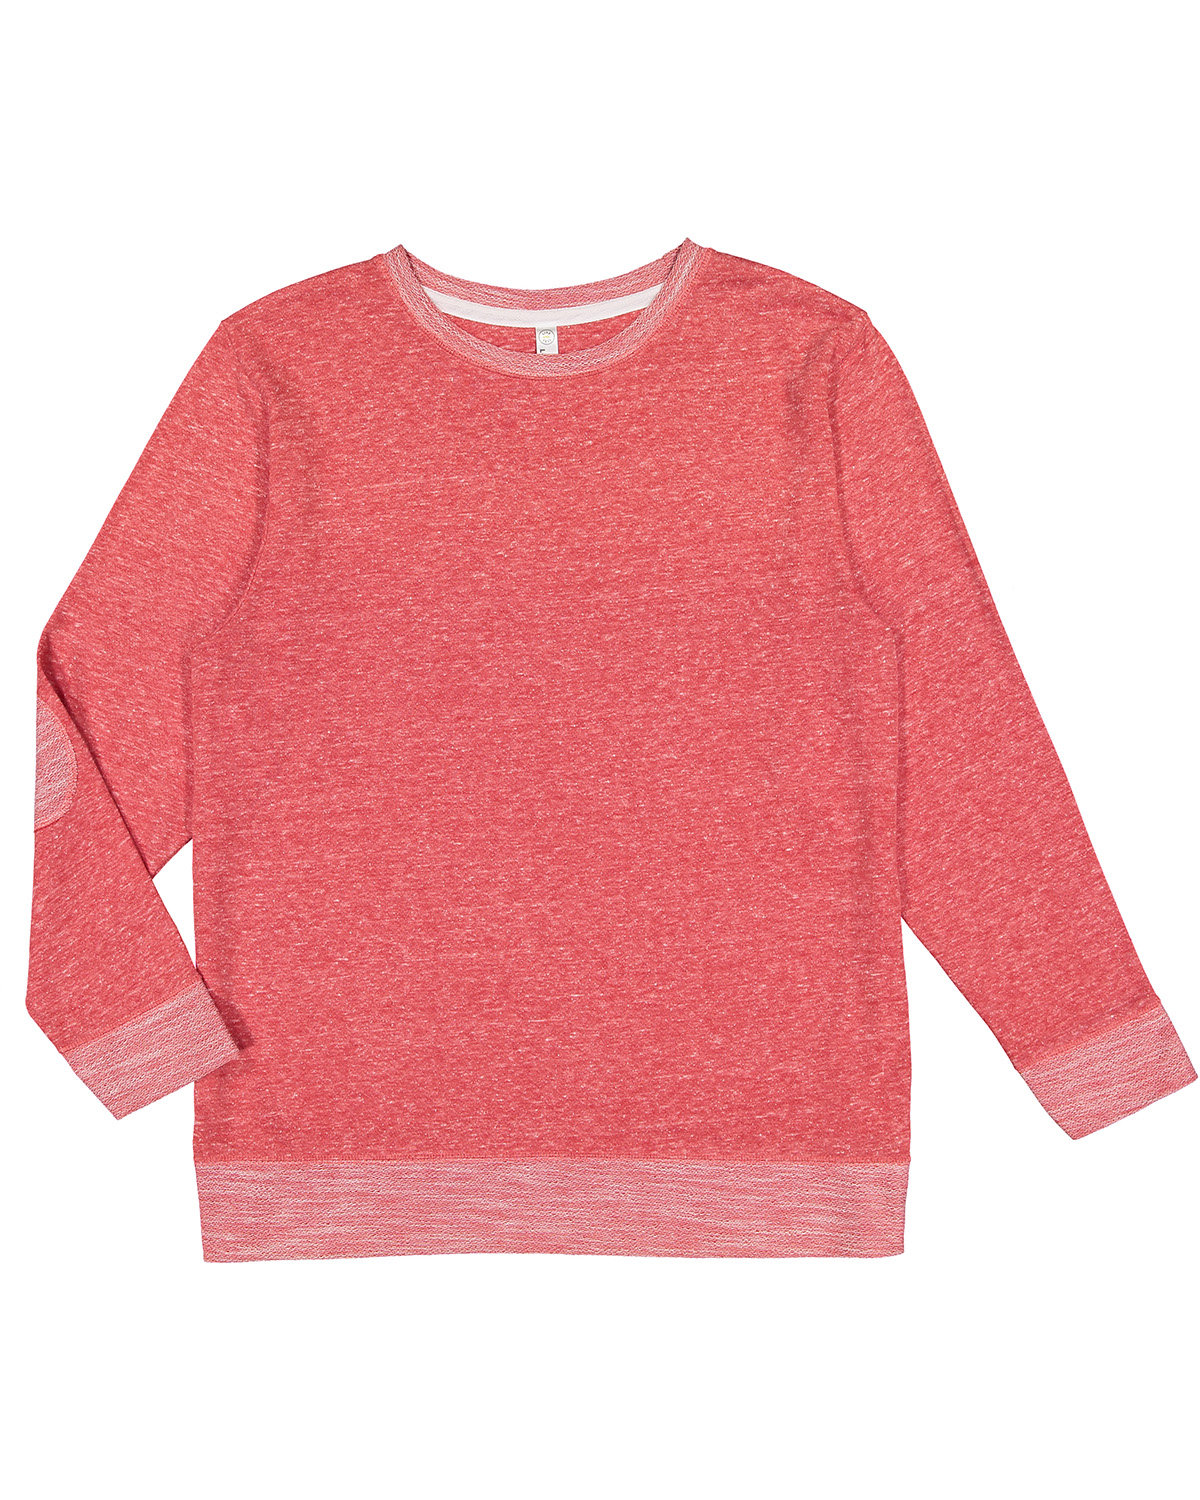 Adult Harborside Melange French Terry Crewneck With Elbow Patches-